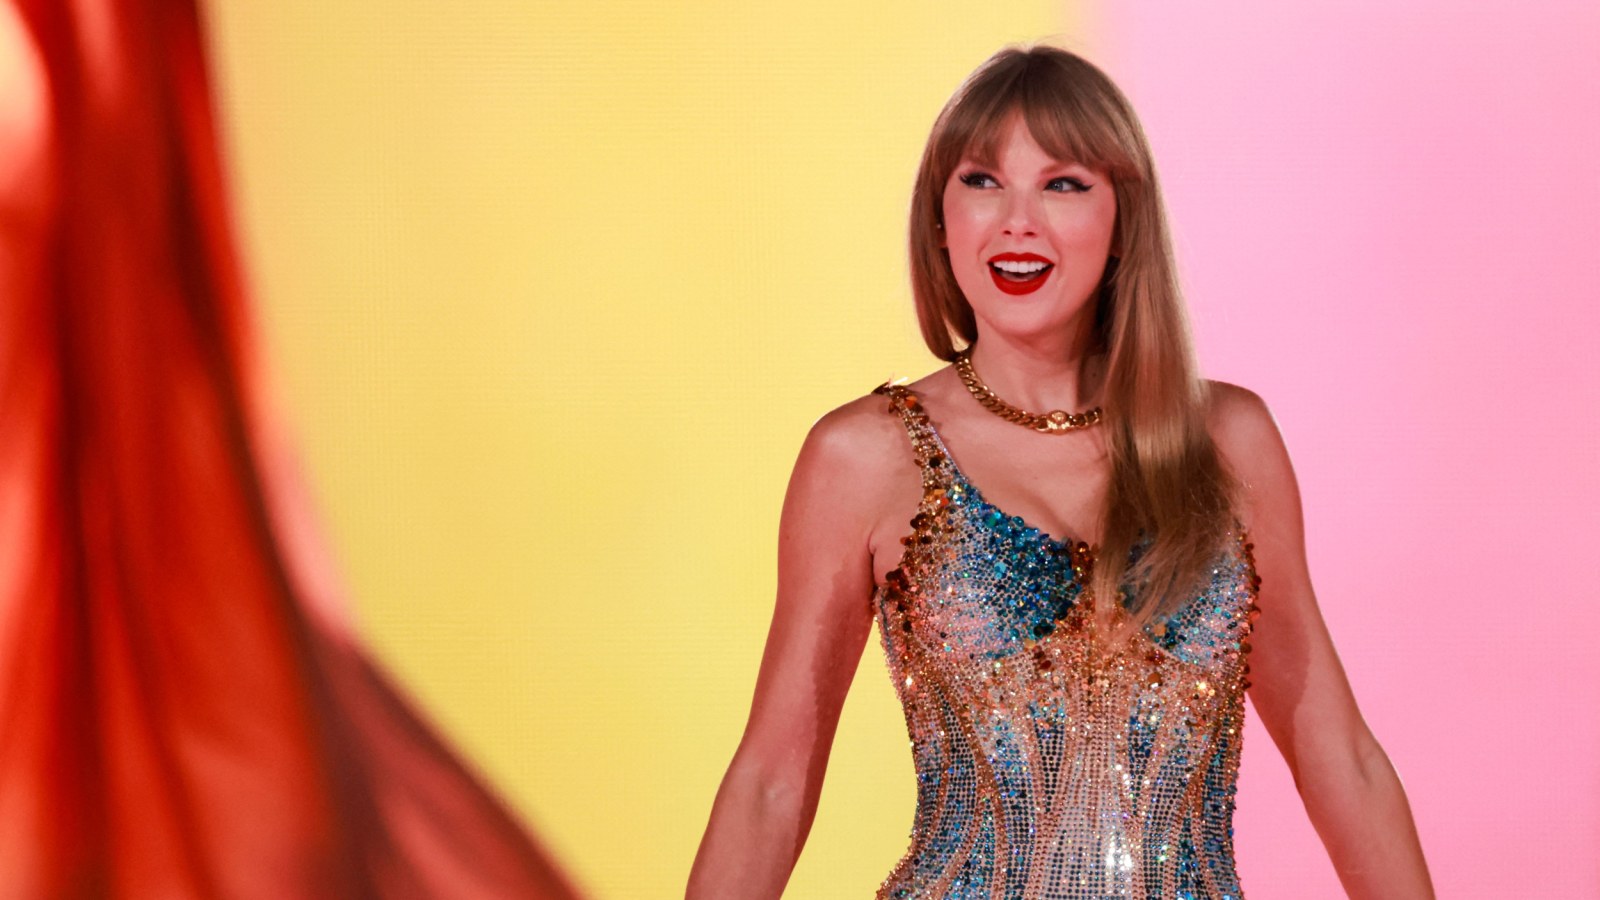 Taylor Swift's Eras Tour: Will her Record-Breaking Tour Break the